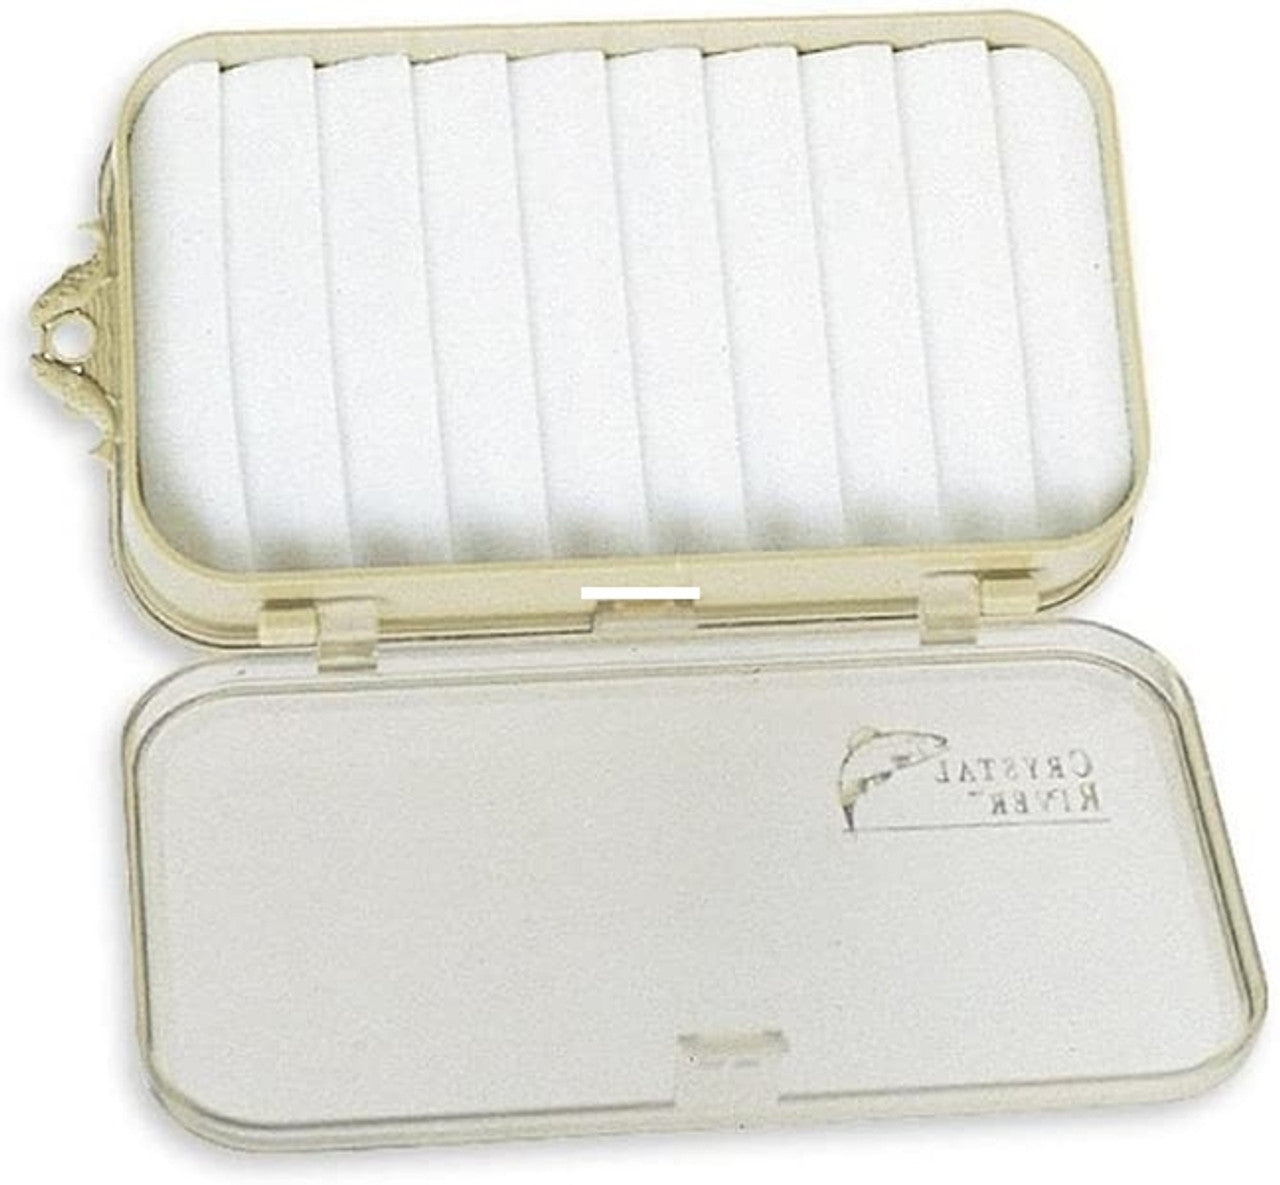 Crystal River 2 Sided Fly Box